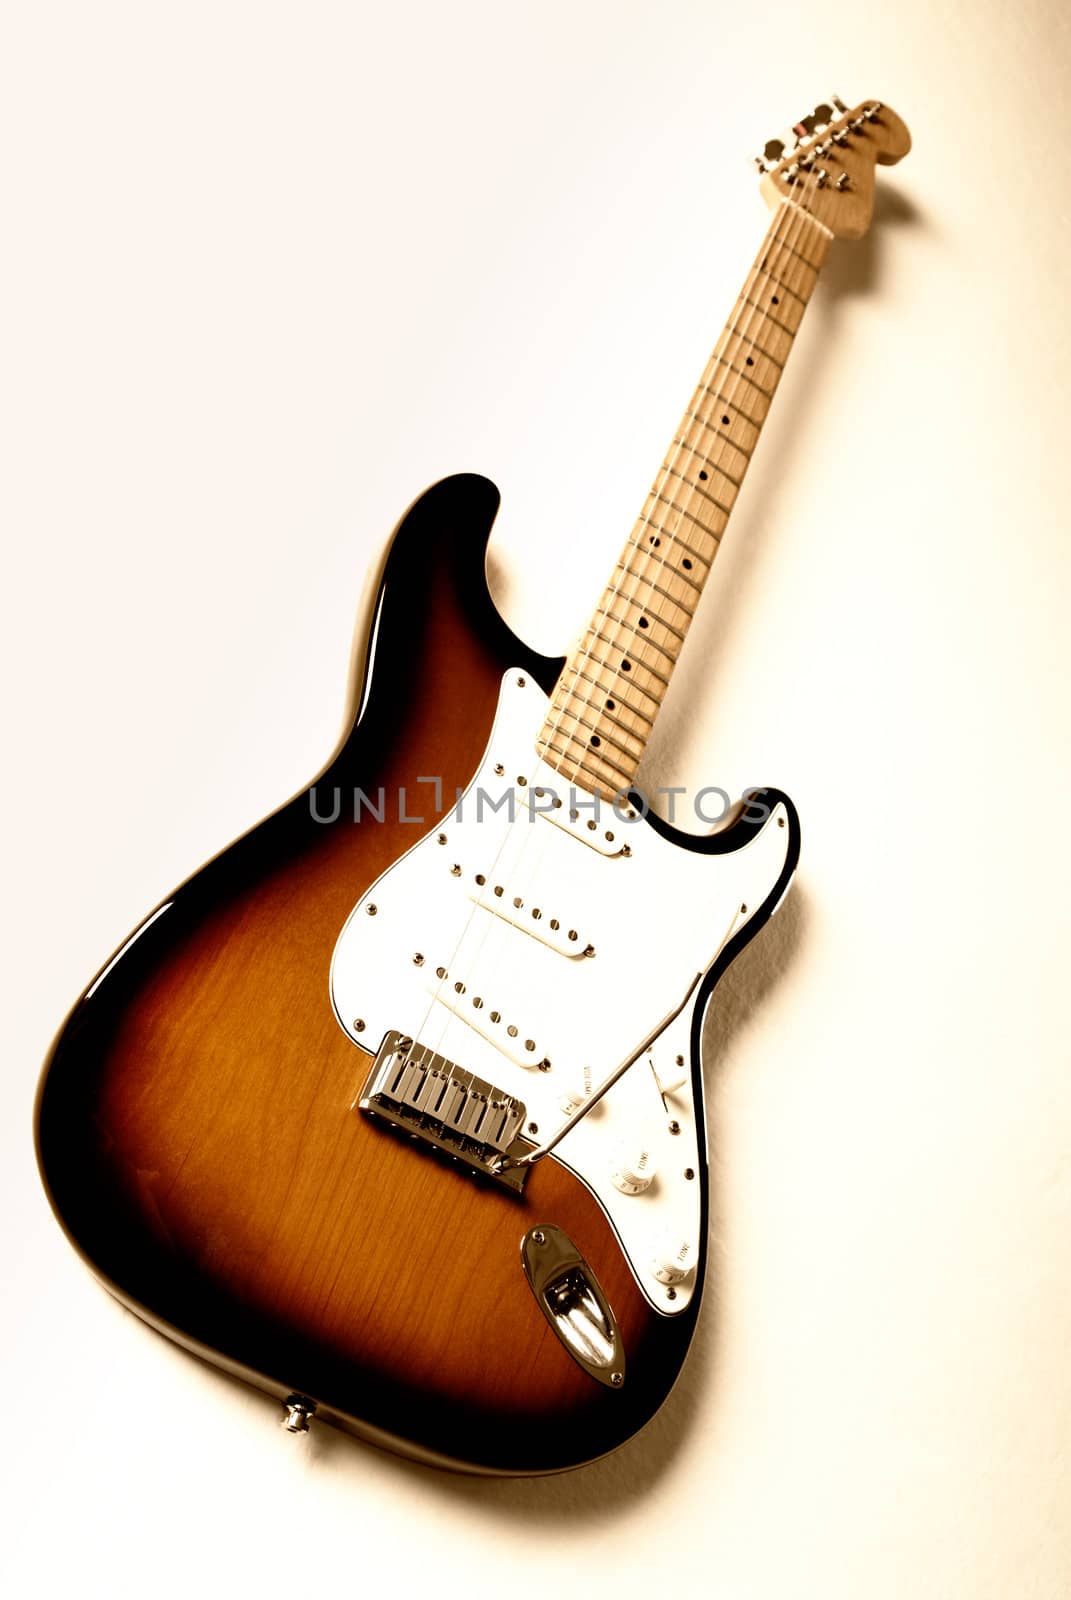 Electric guitar with orange lighting and shallow depth of field.  